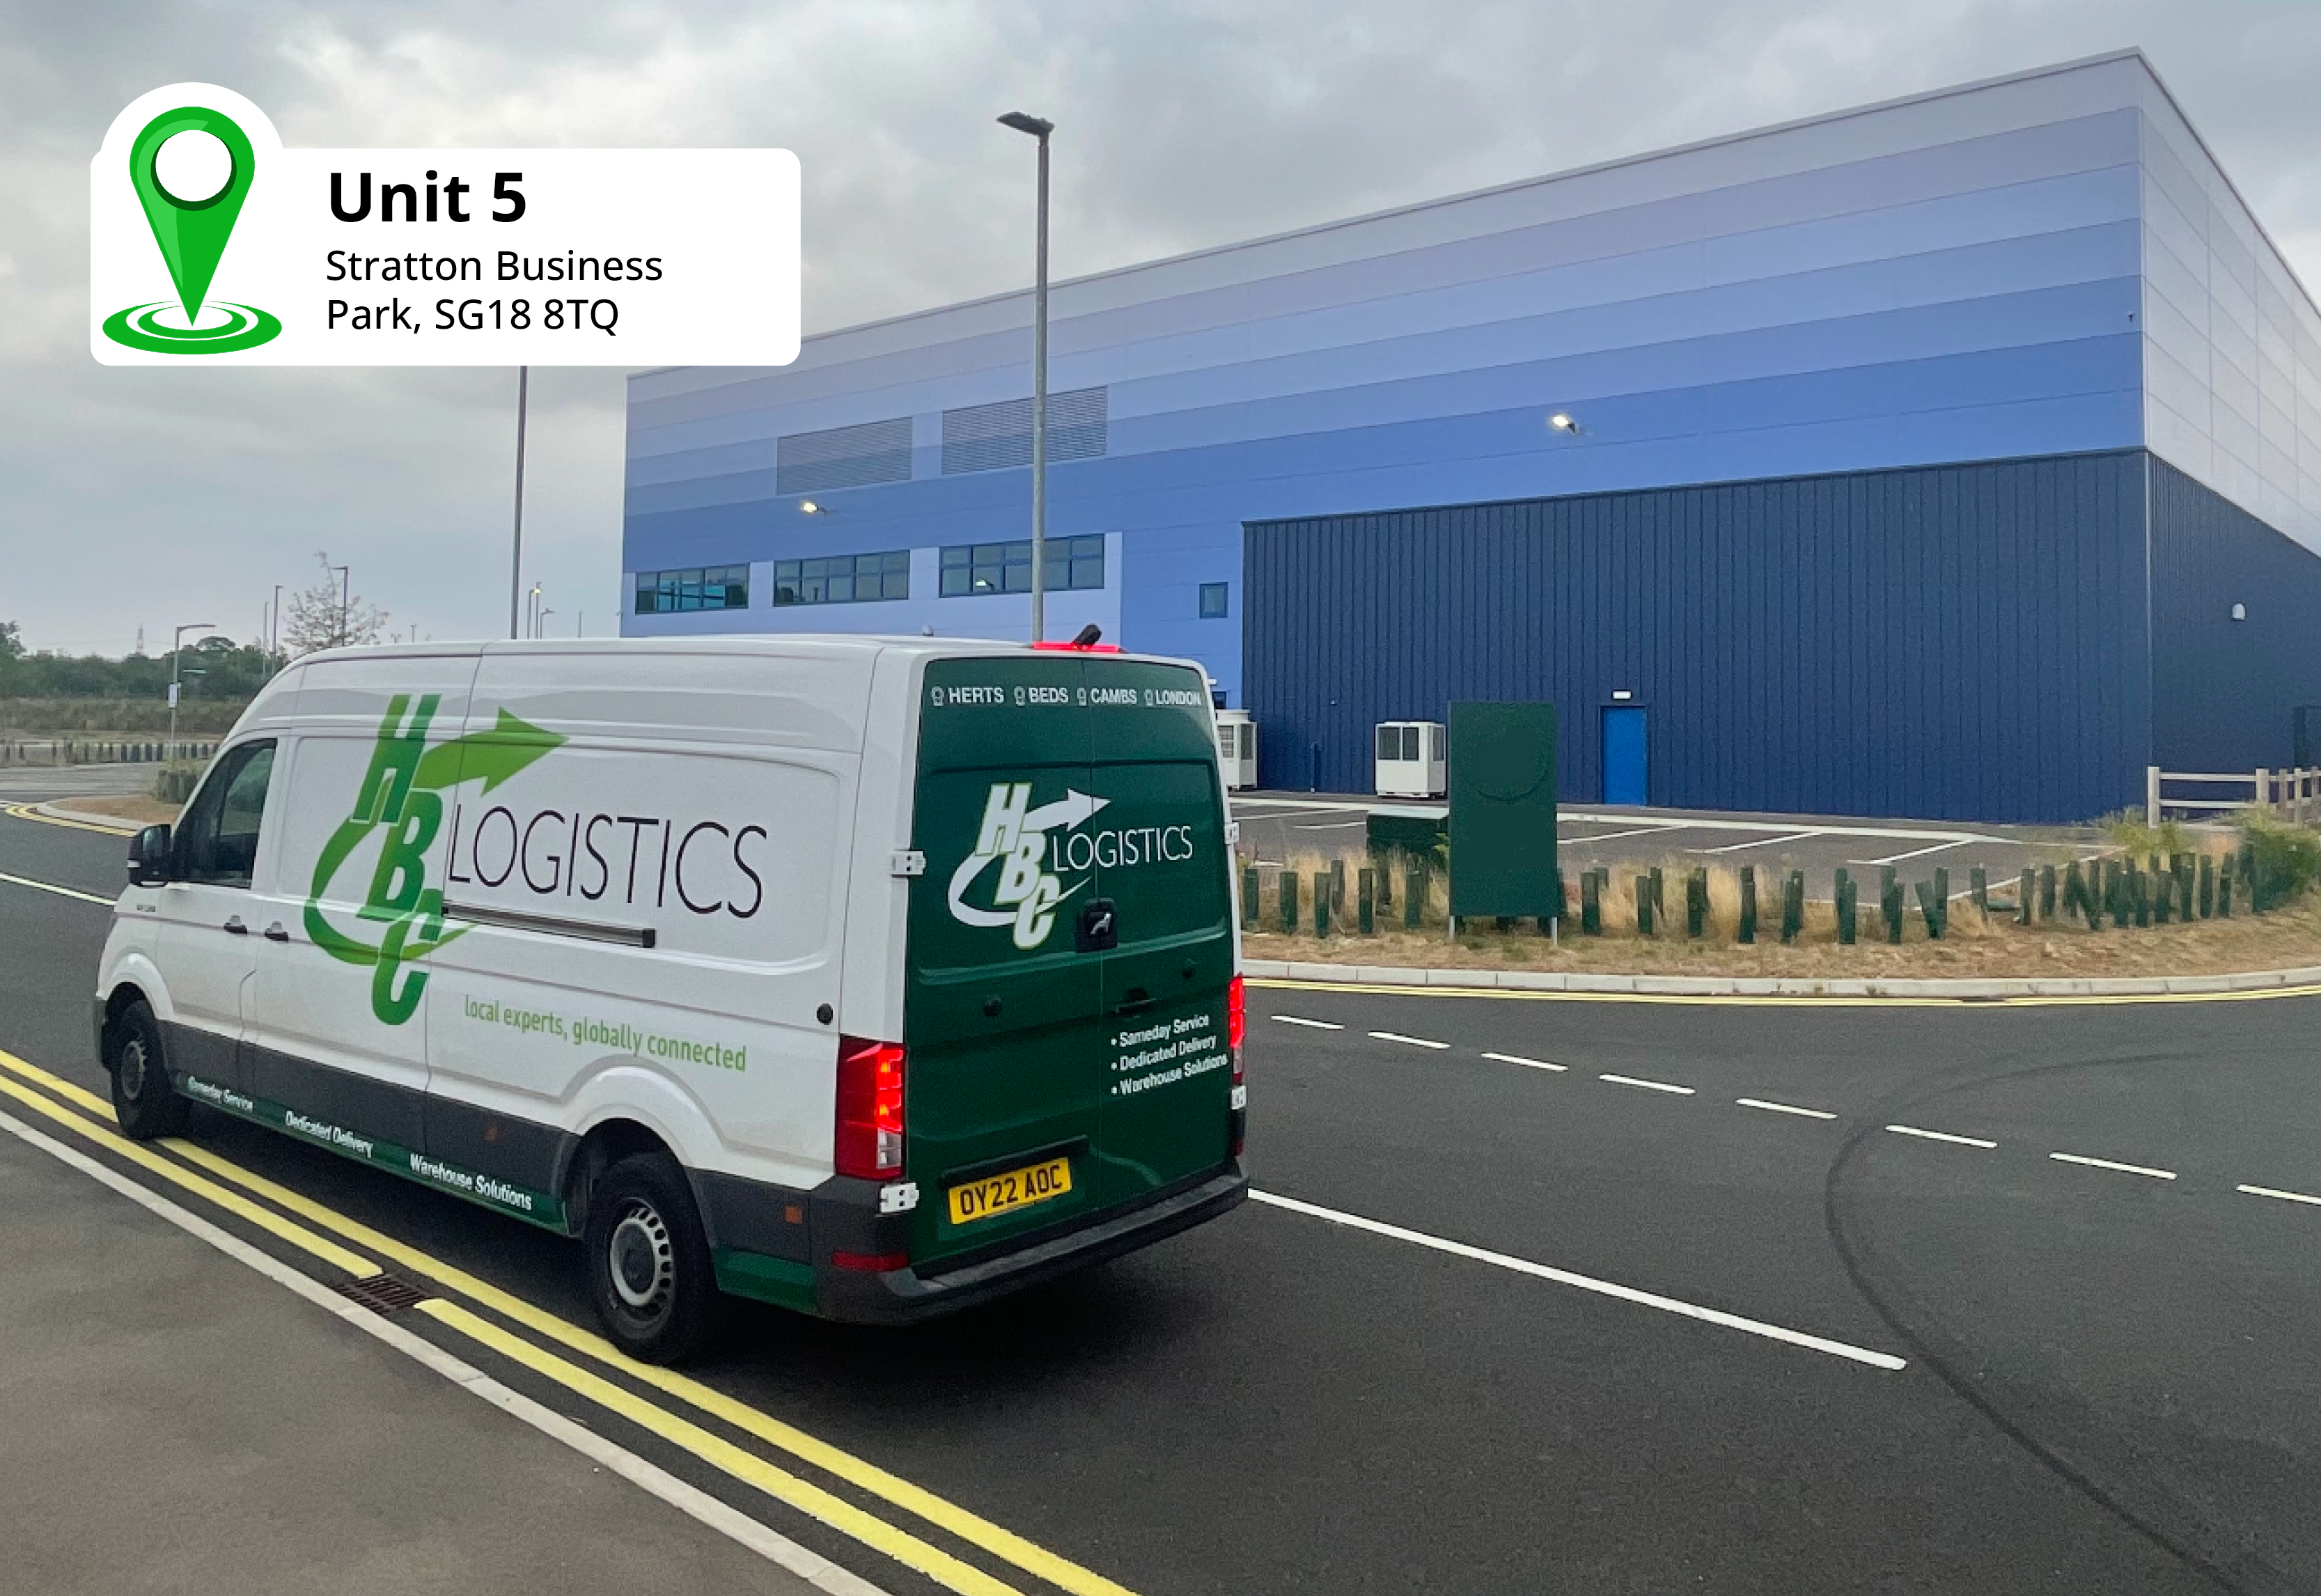 WE ARE RELOCATING! An exciting future for HBC Logistics